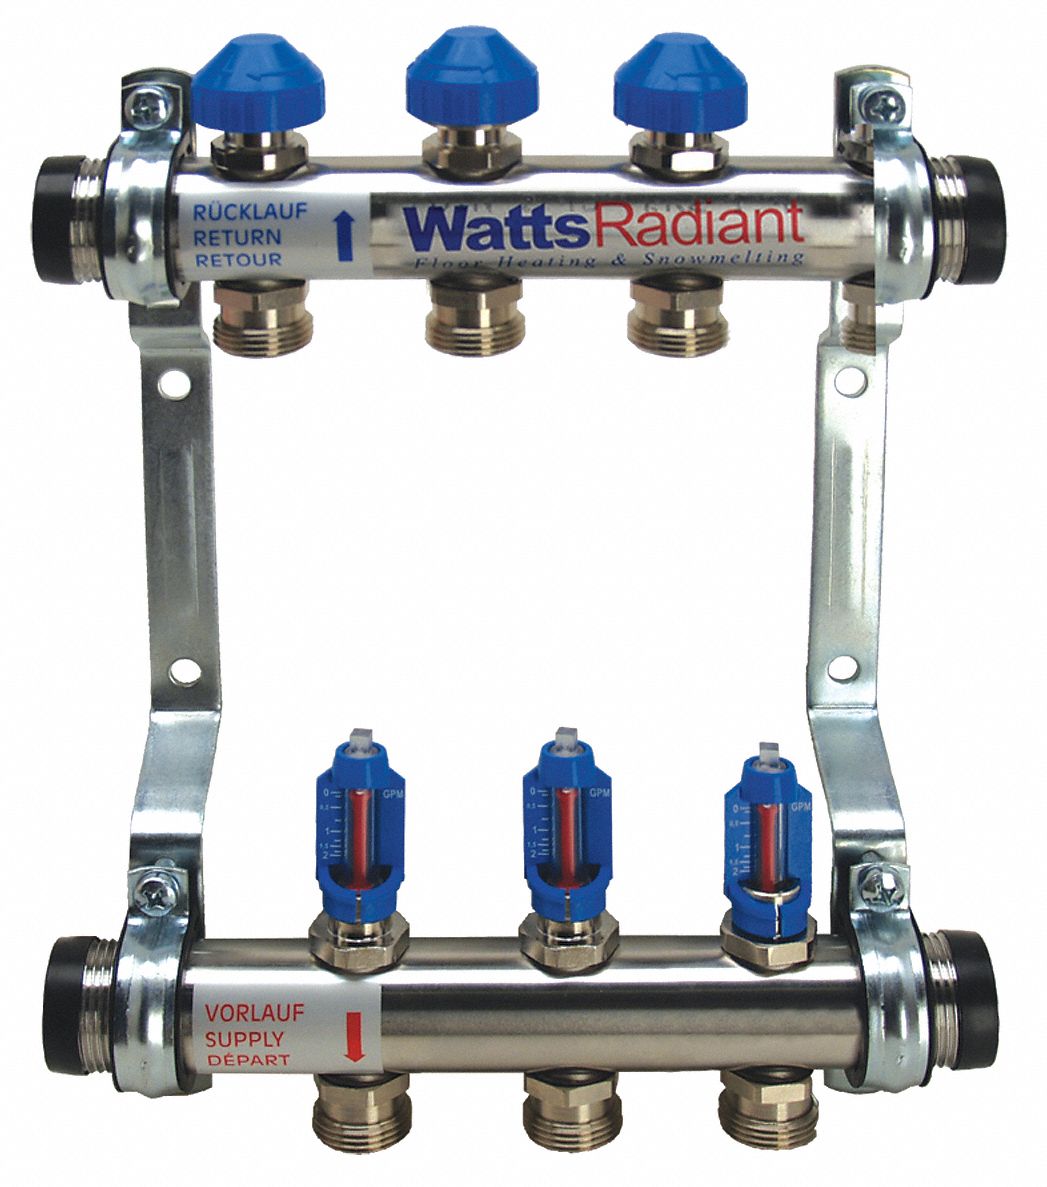 Flowmeter Manifold: 304 Stainless Steel, 3 Outlets, 1 in Male MBSP inlet, 1 in Male MBSP Outlet